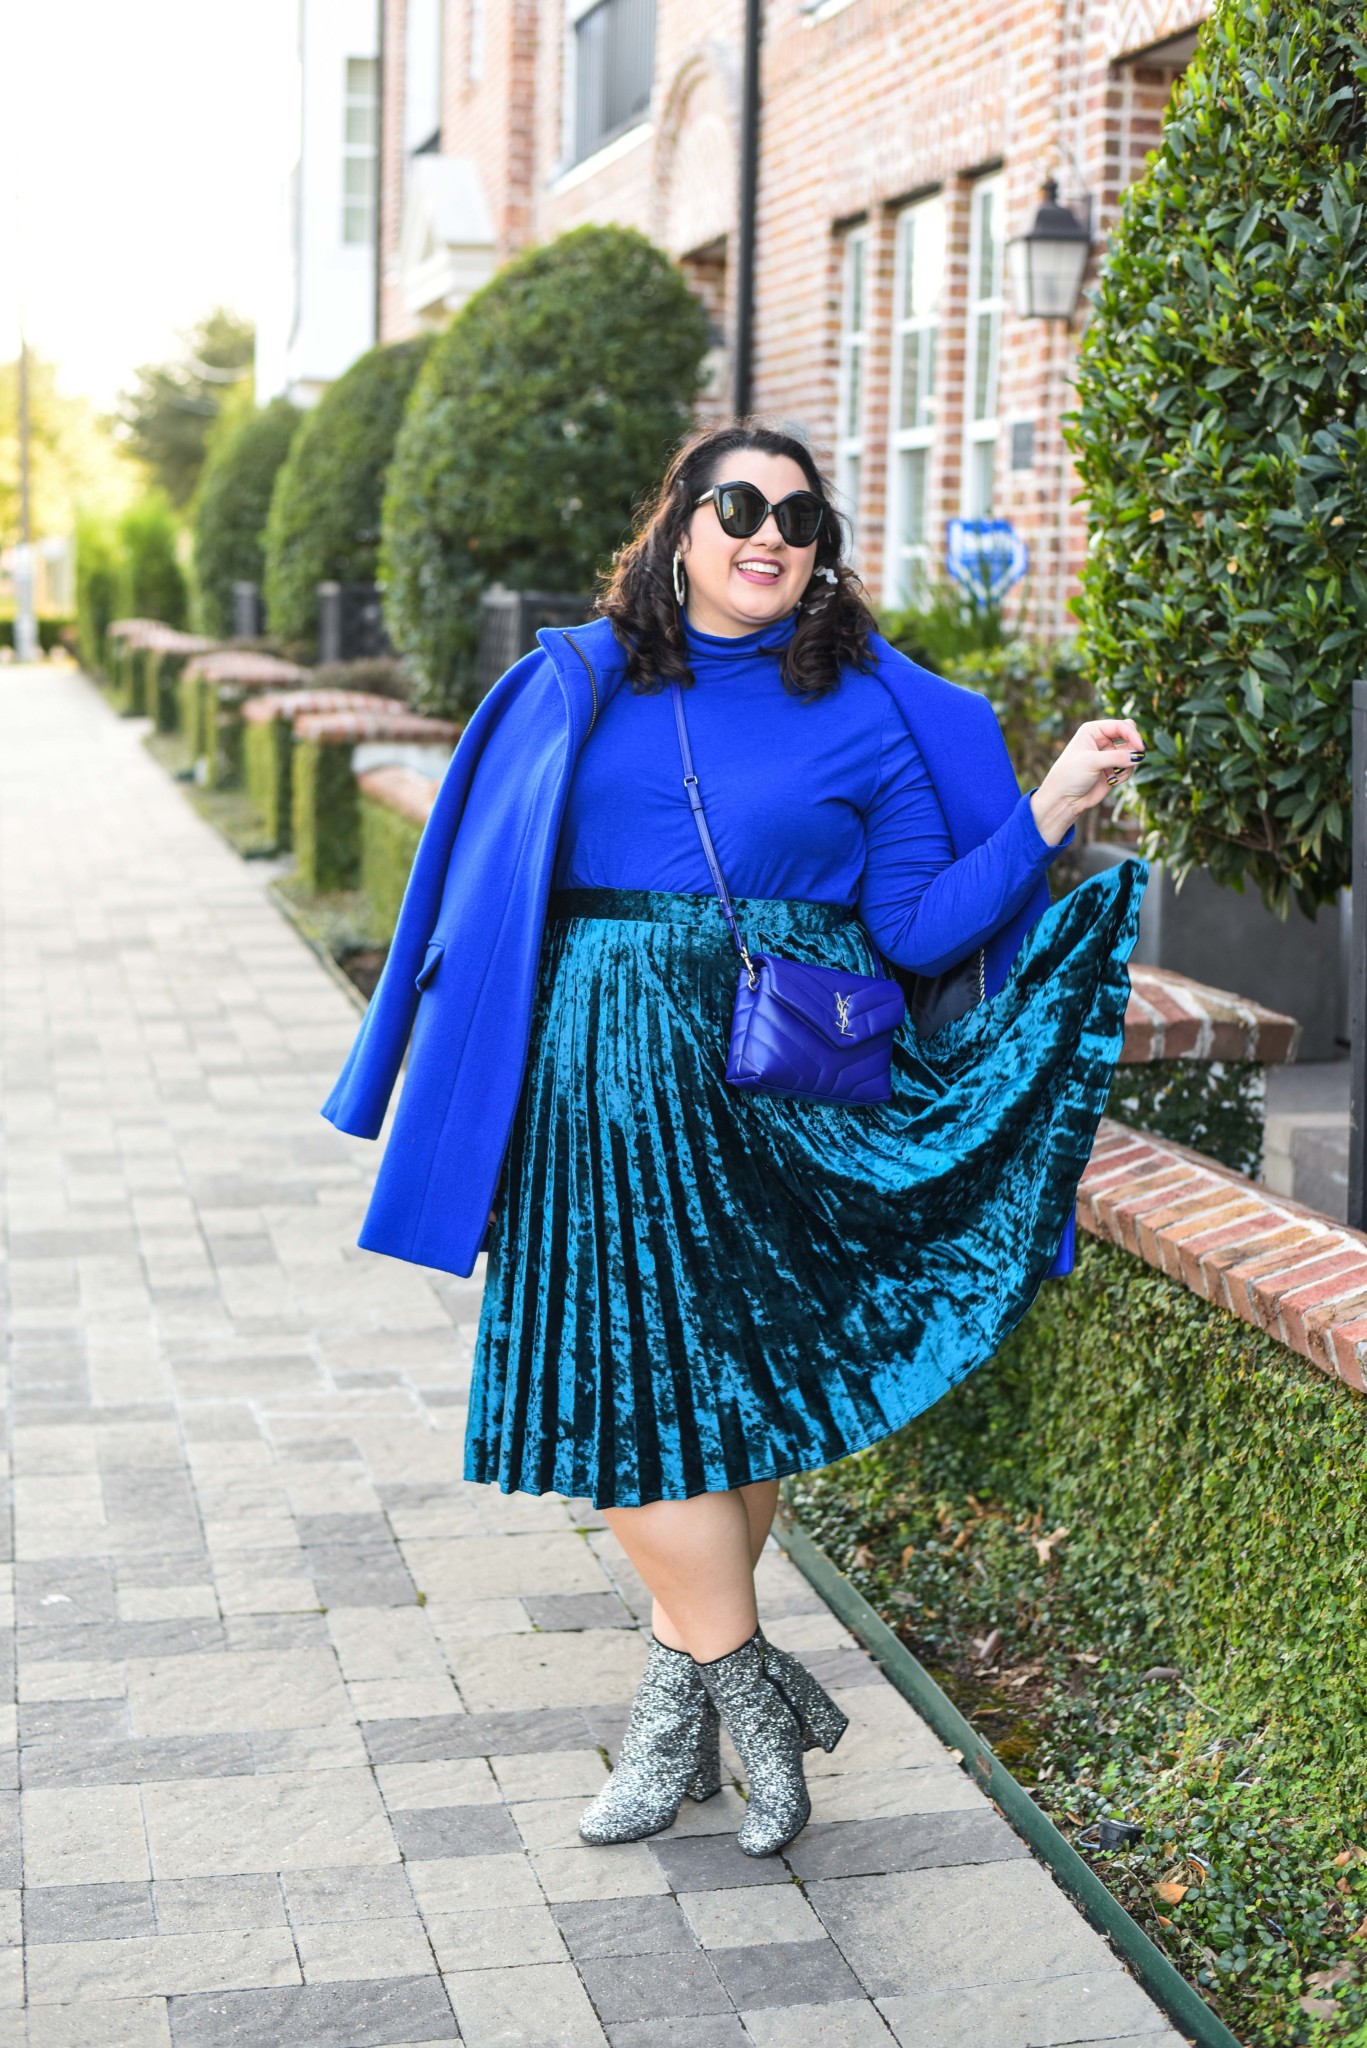 Looking fabulous and wearing the latest fashion trends can be done by anyone at any size. Something Gold, Something Blue is sharing how she is embracing the monochromatic trend by styling an all blue outfit. 